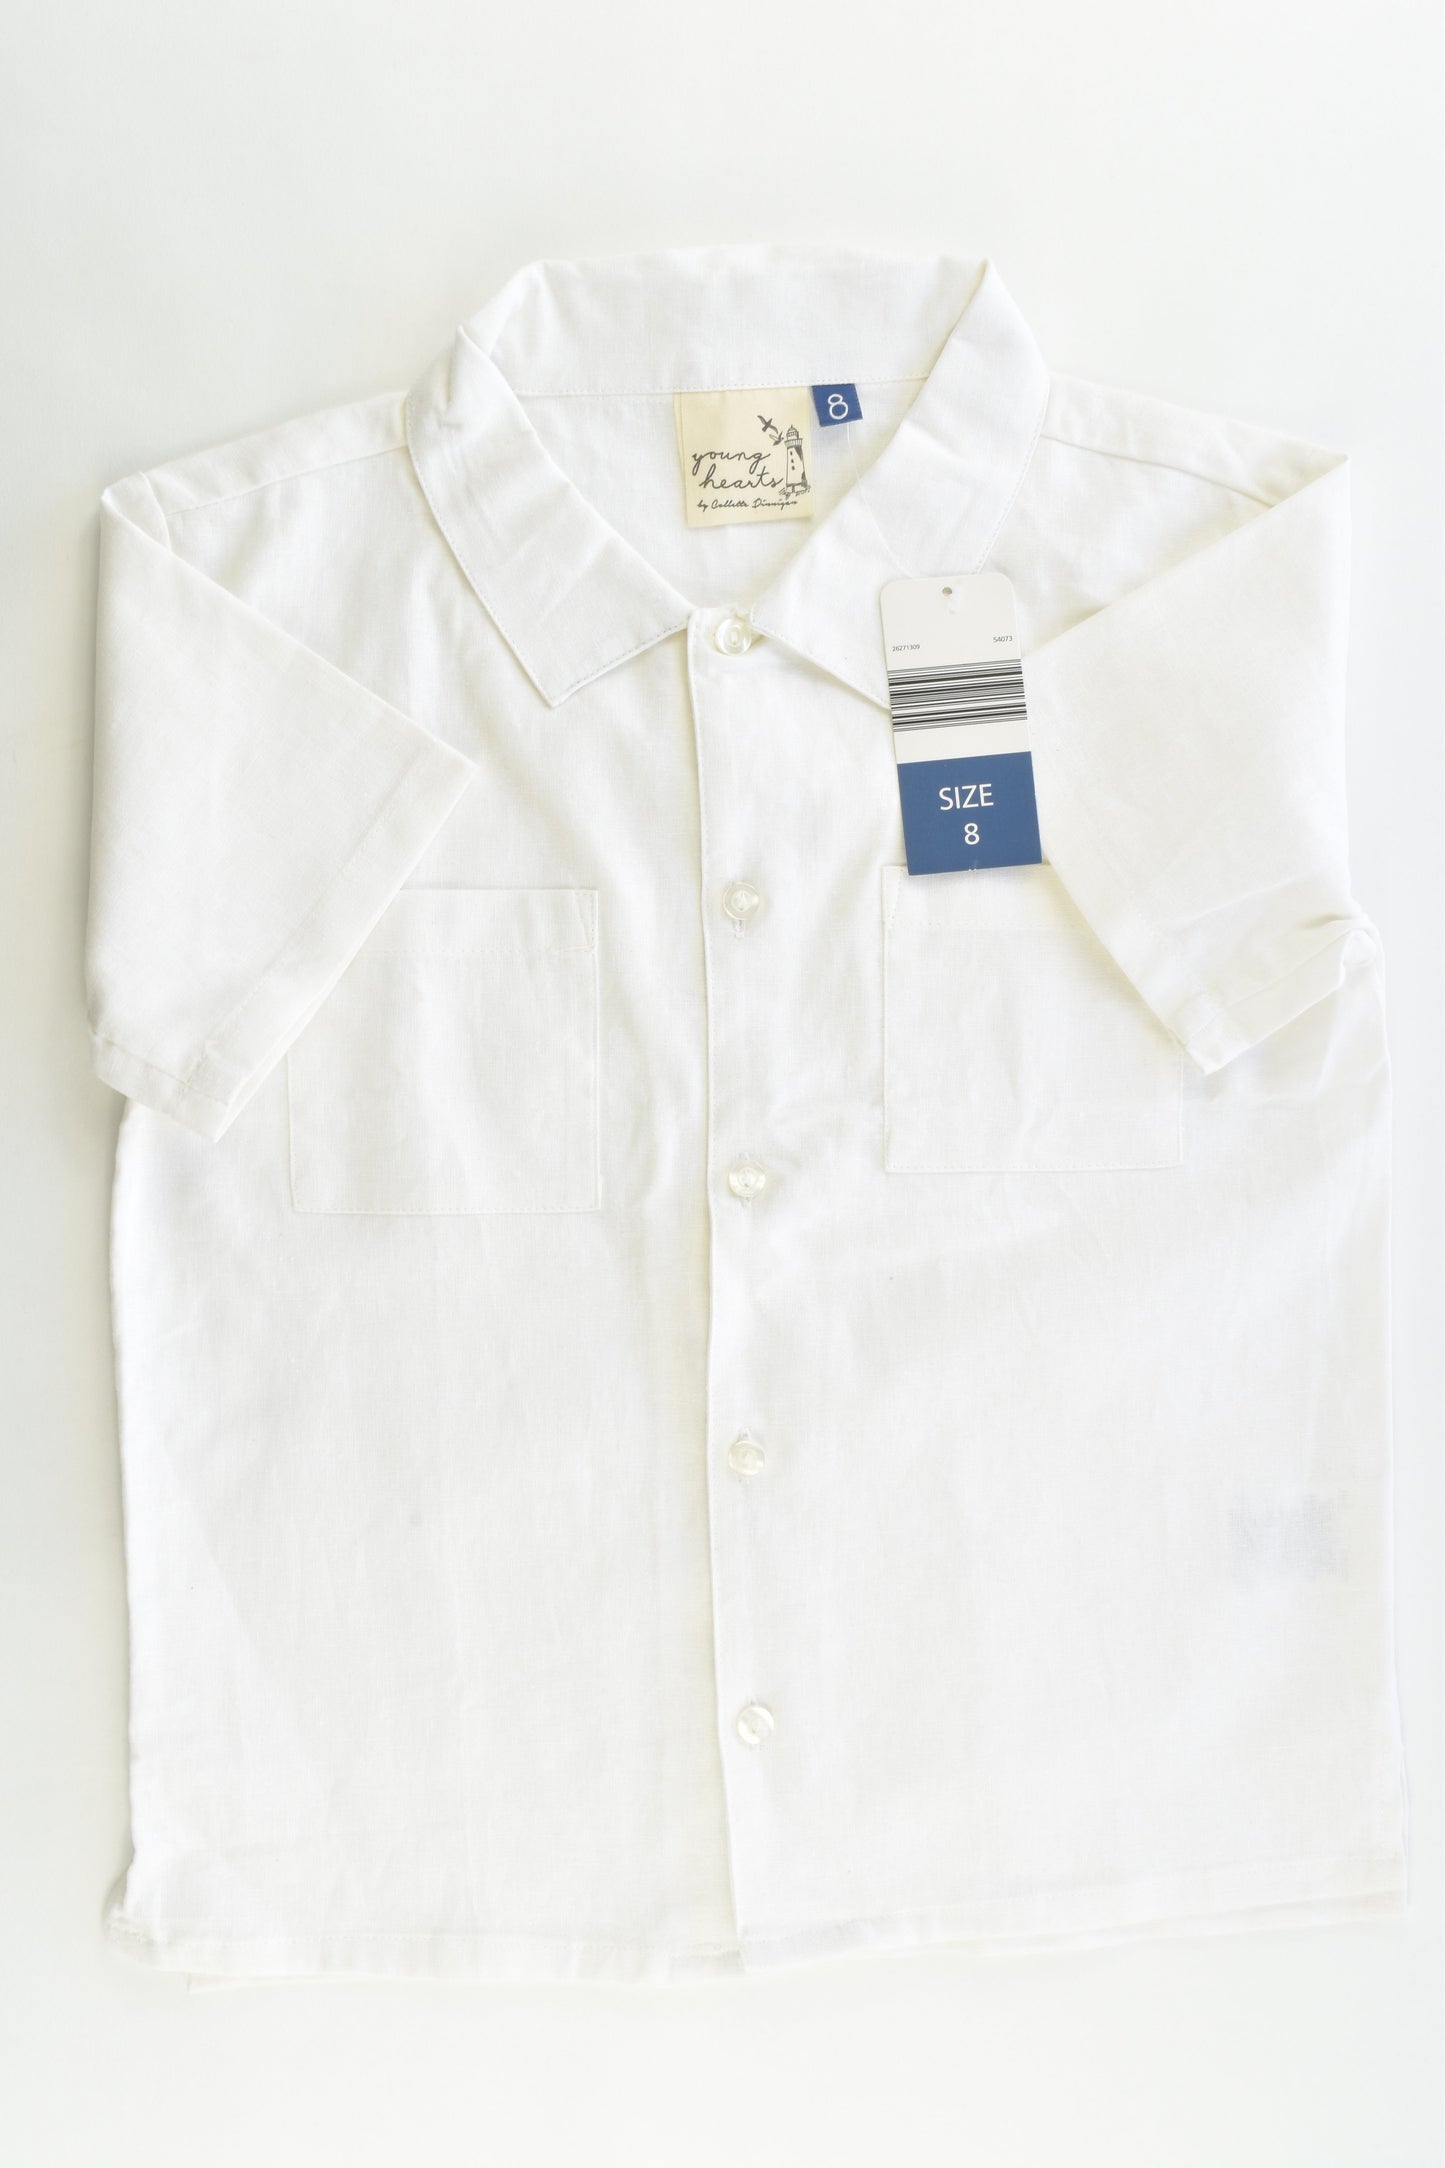 NEW Young Hearts Size 8 Linen/Cotton Collared Shirt